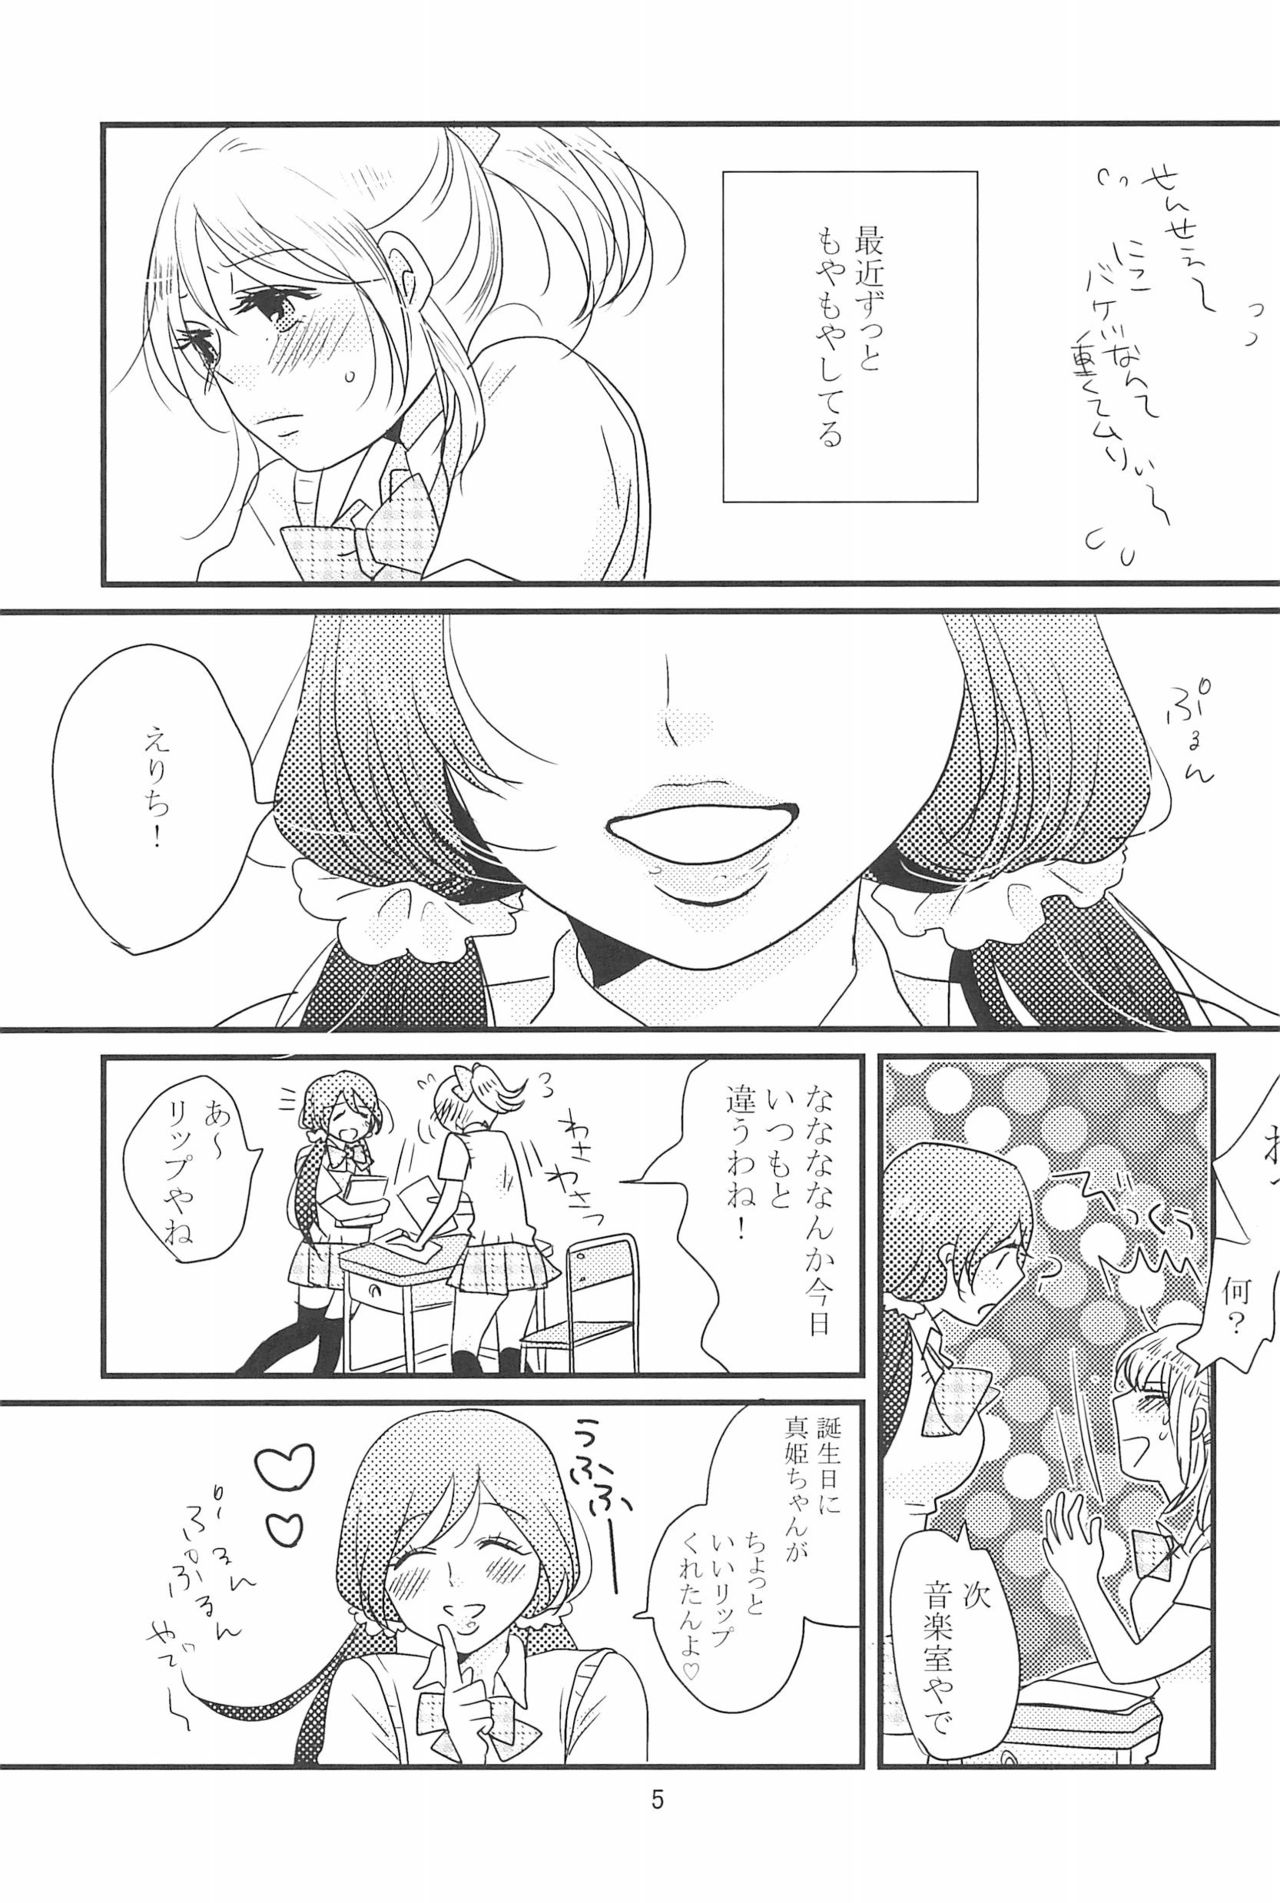 (C90) [BK*N2 (Mikawa Miso)] HAPPY GO LUCKY DAYS (Love Live!) page 9 full